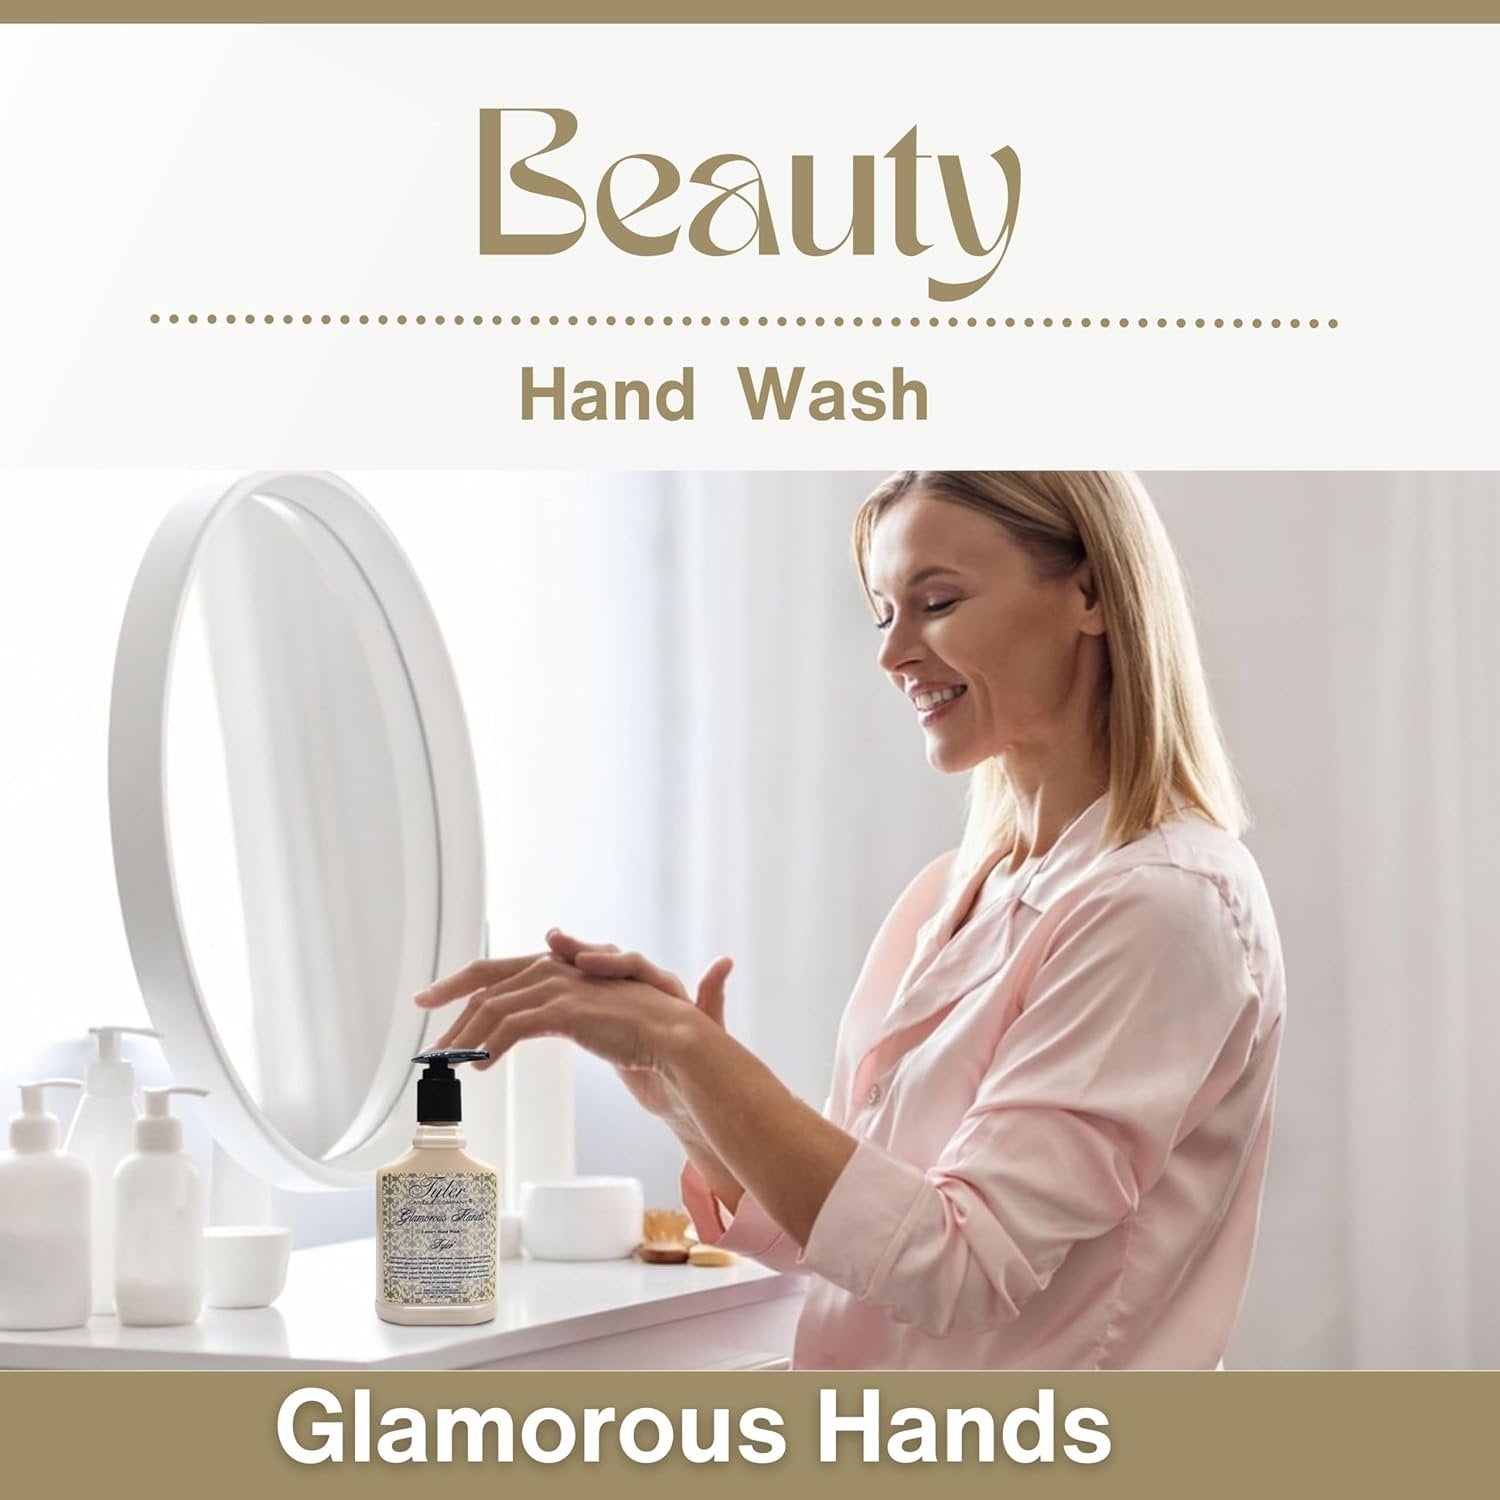 Tyler Candle Company Glamorous Hands - Tyler Luxury Hand Wash - Cleanse, Moisturize, Protect Damage and Aging Skin - 1 Pack of 8 oz (224g) - with Multi-Purpose Keychain